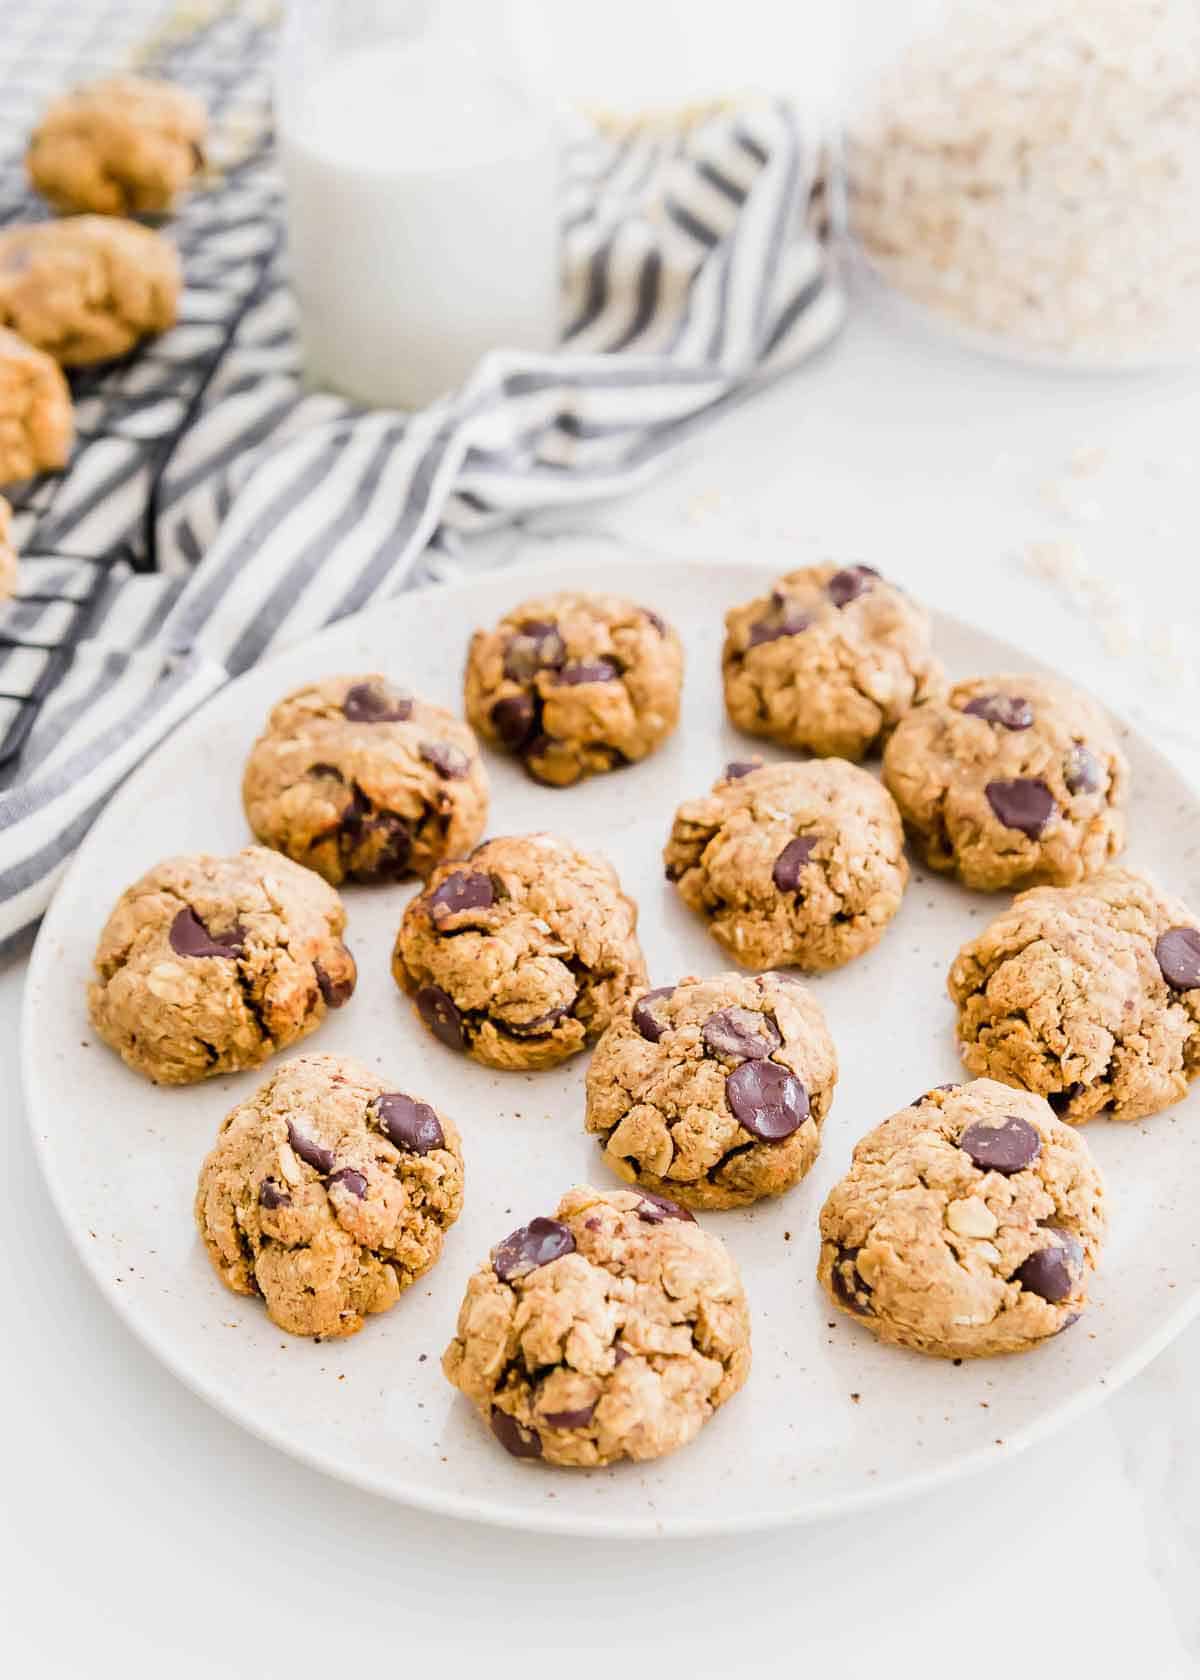 These oatmeal chocolate chip cookies made with almond pulp from homemade almond milk are an easy gluten-free, vegan dessert while healthy enough for an afternoon snack!